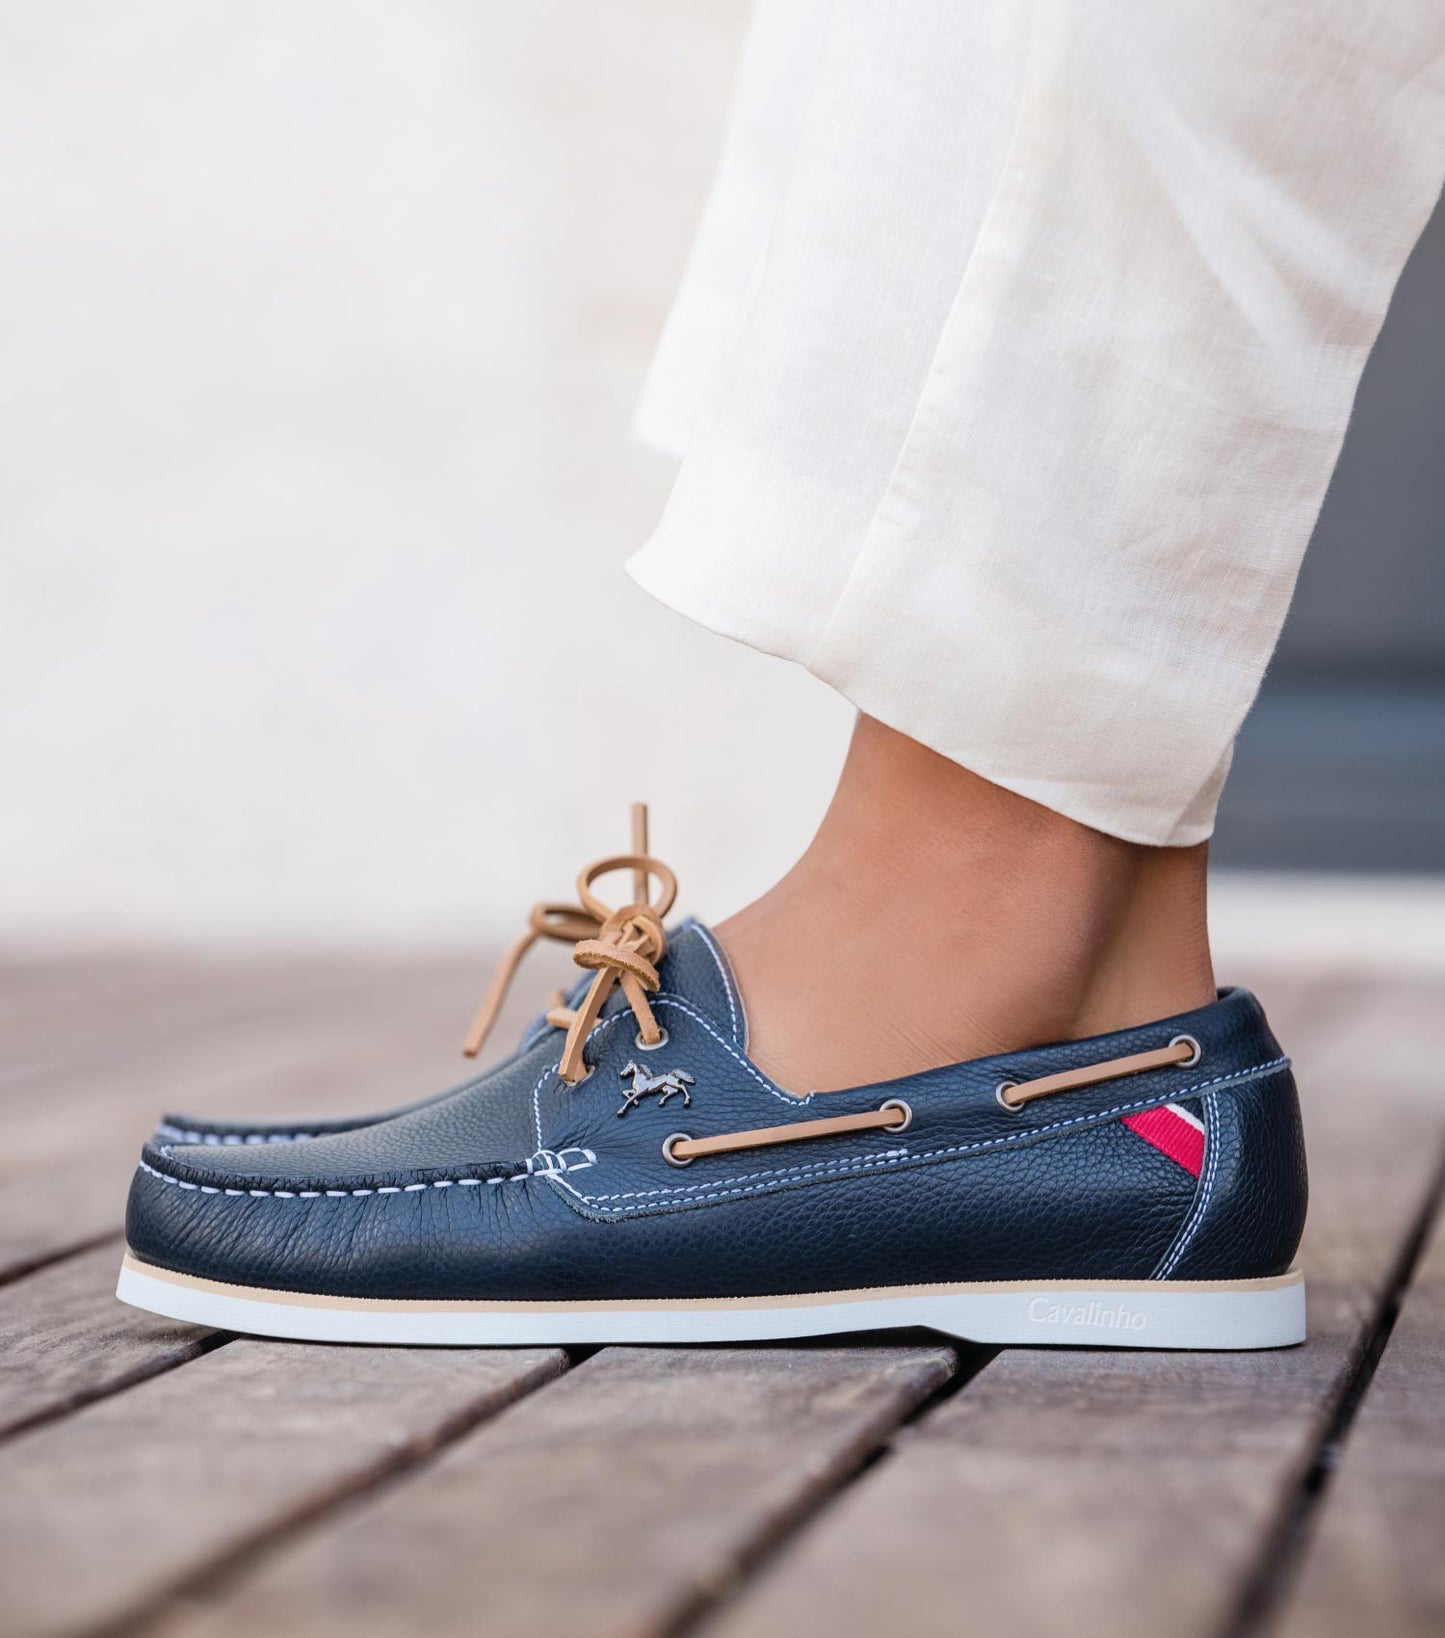 #color_ Navy | Cavalinho The Sailor Boat Shoes - Navy - 48020002.03LifeStyle